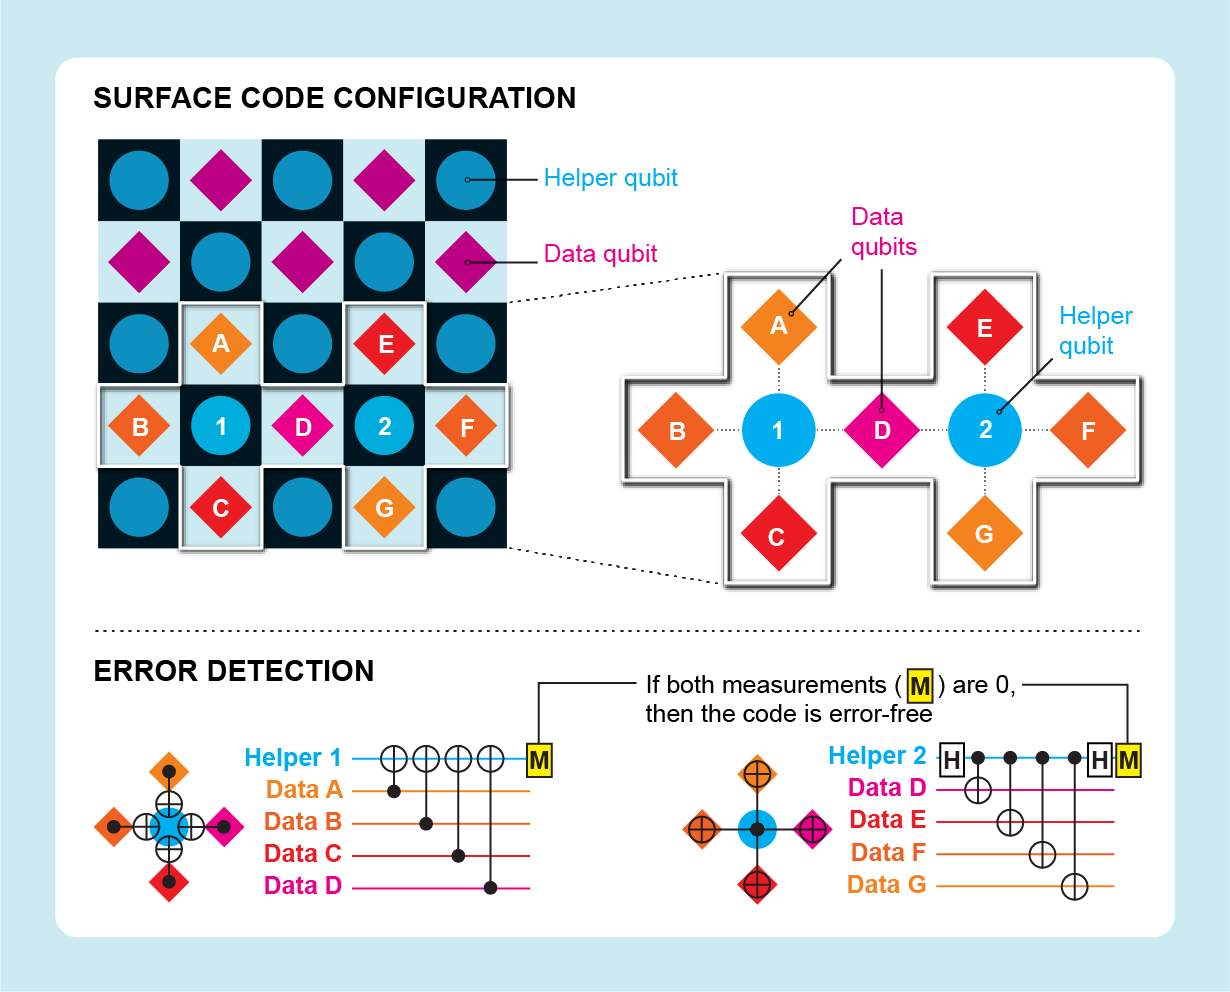 Graphic shows how data qubits and helper qubits work together to detect errors in code.